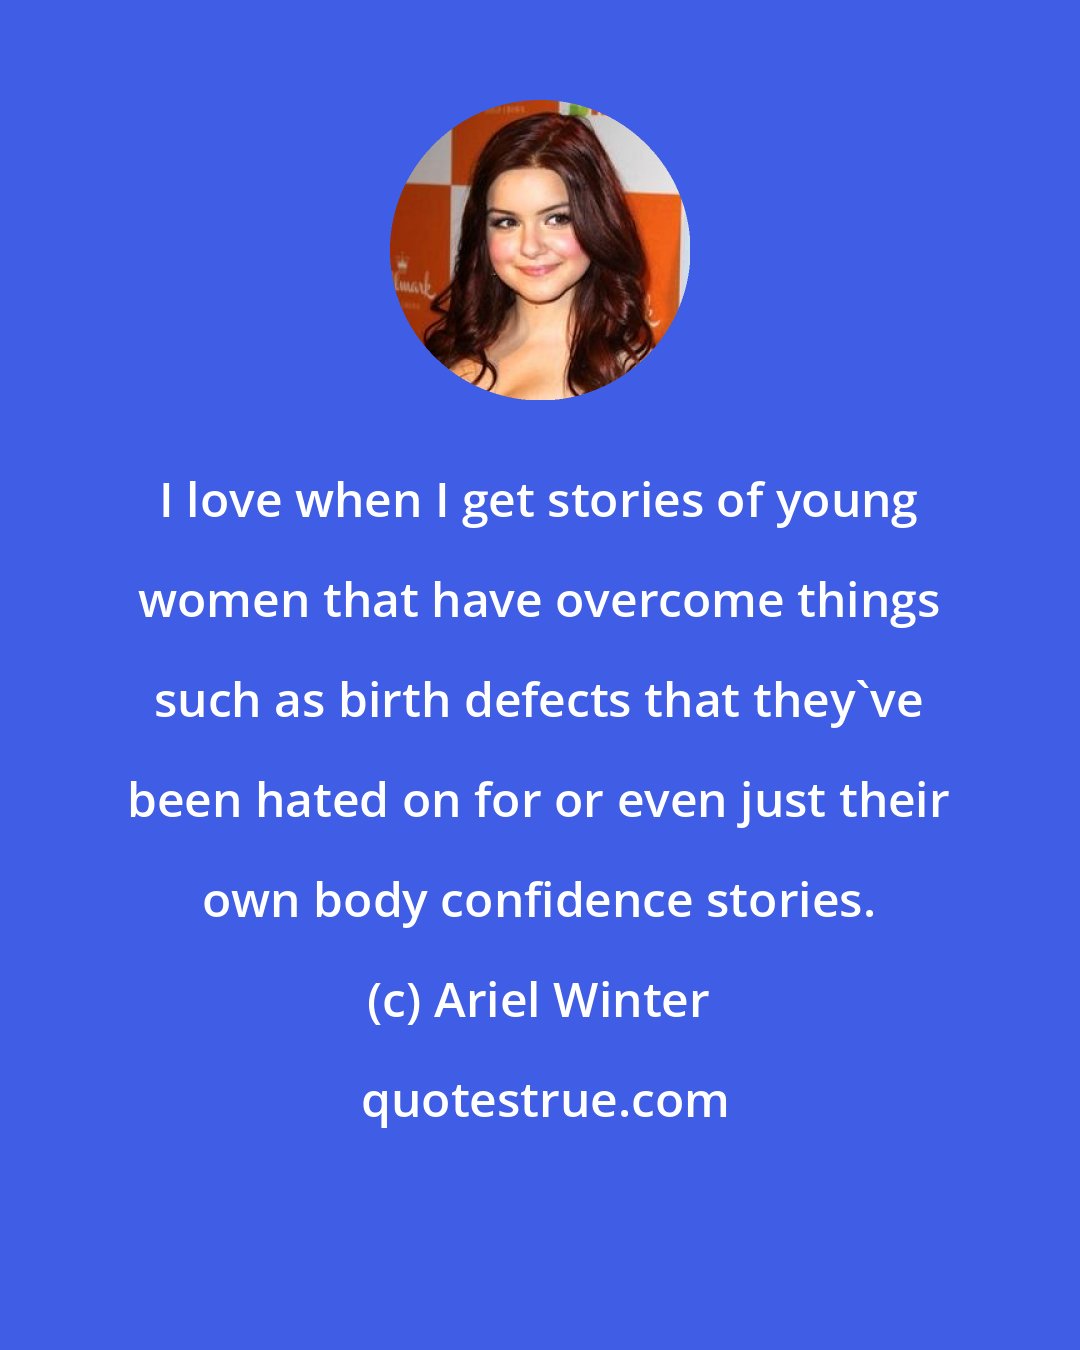 Ariel Winter: I love when I get stories of young women that have overcome things such as birth defects that they've been hated on for or even just their own body confidence stories.